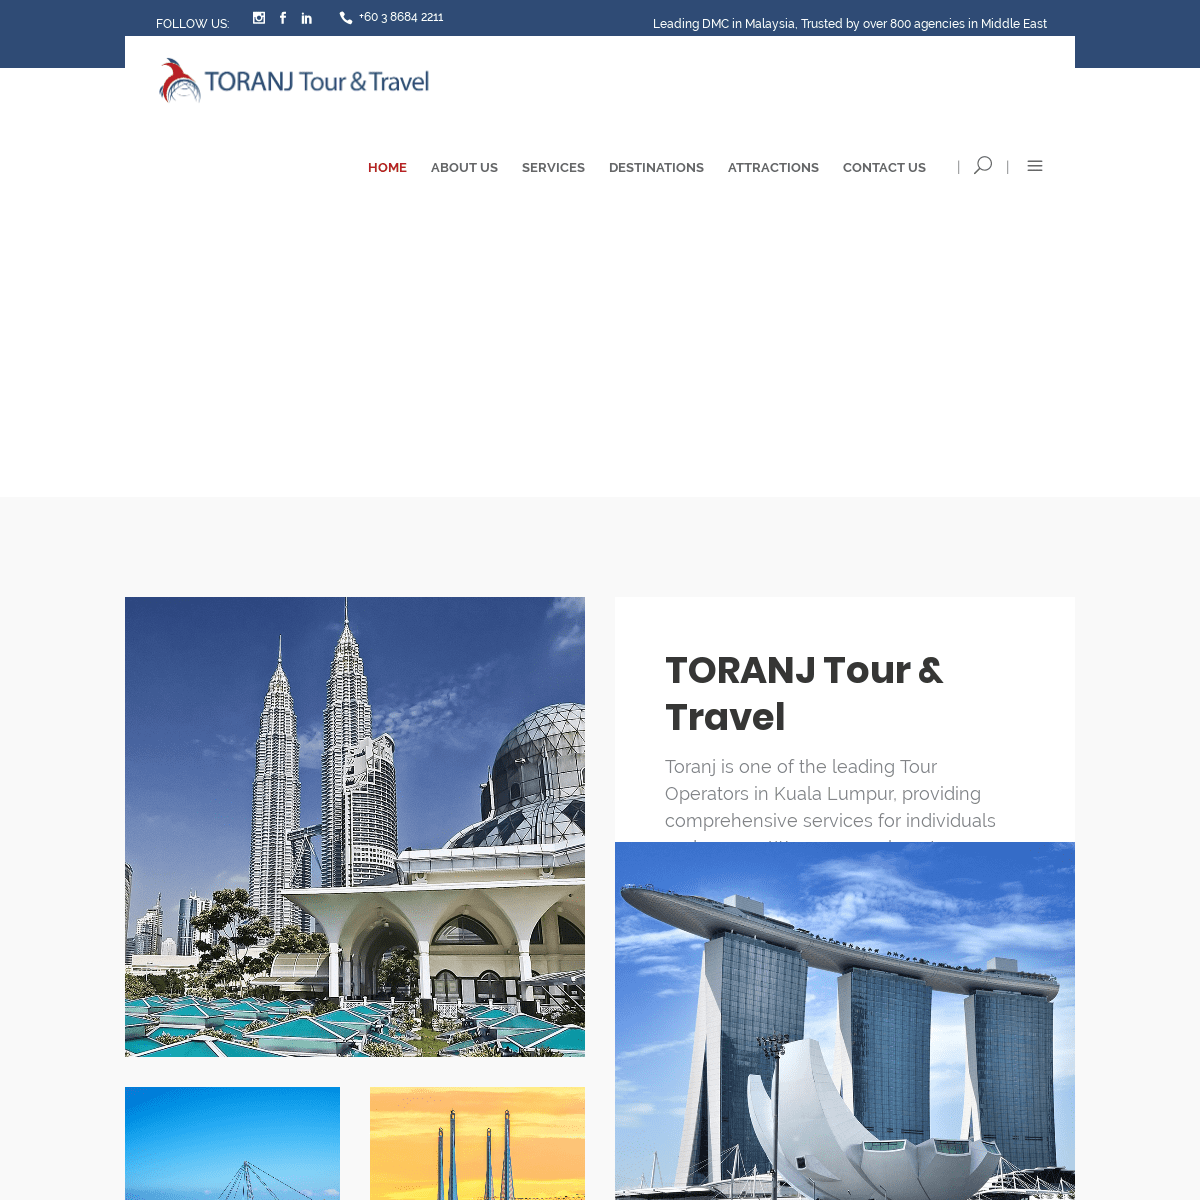 TORANJ Tour & Travel – Leading DMC in Malaysia, trusted by over 800 agencies in Middle East